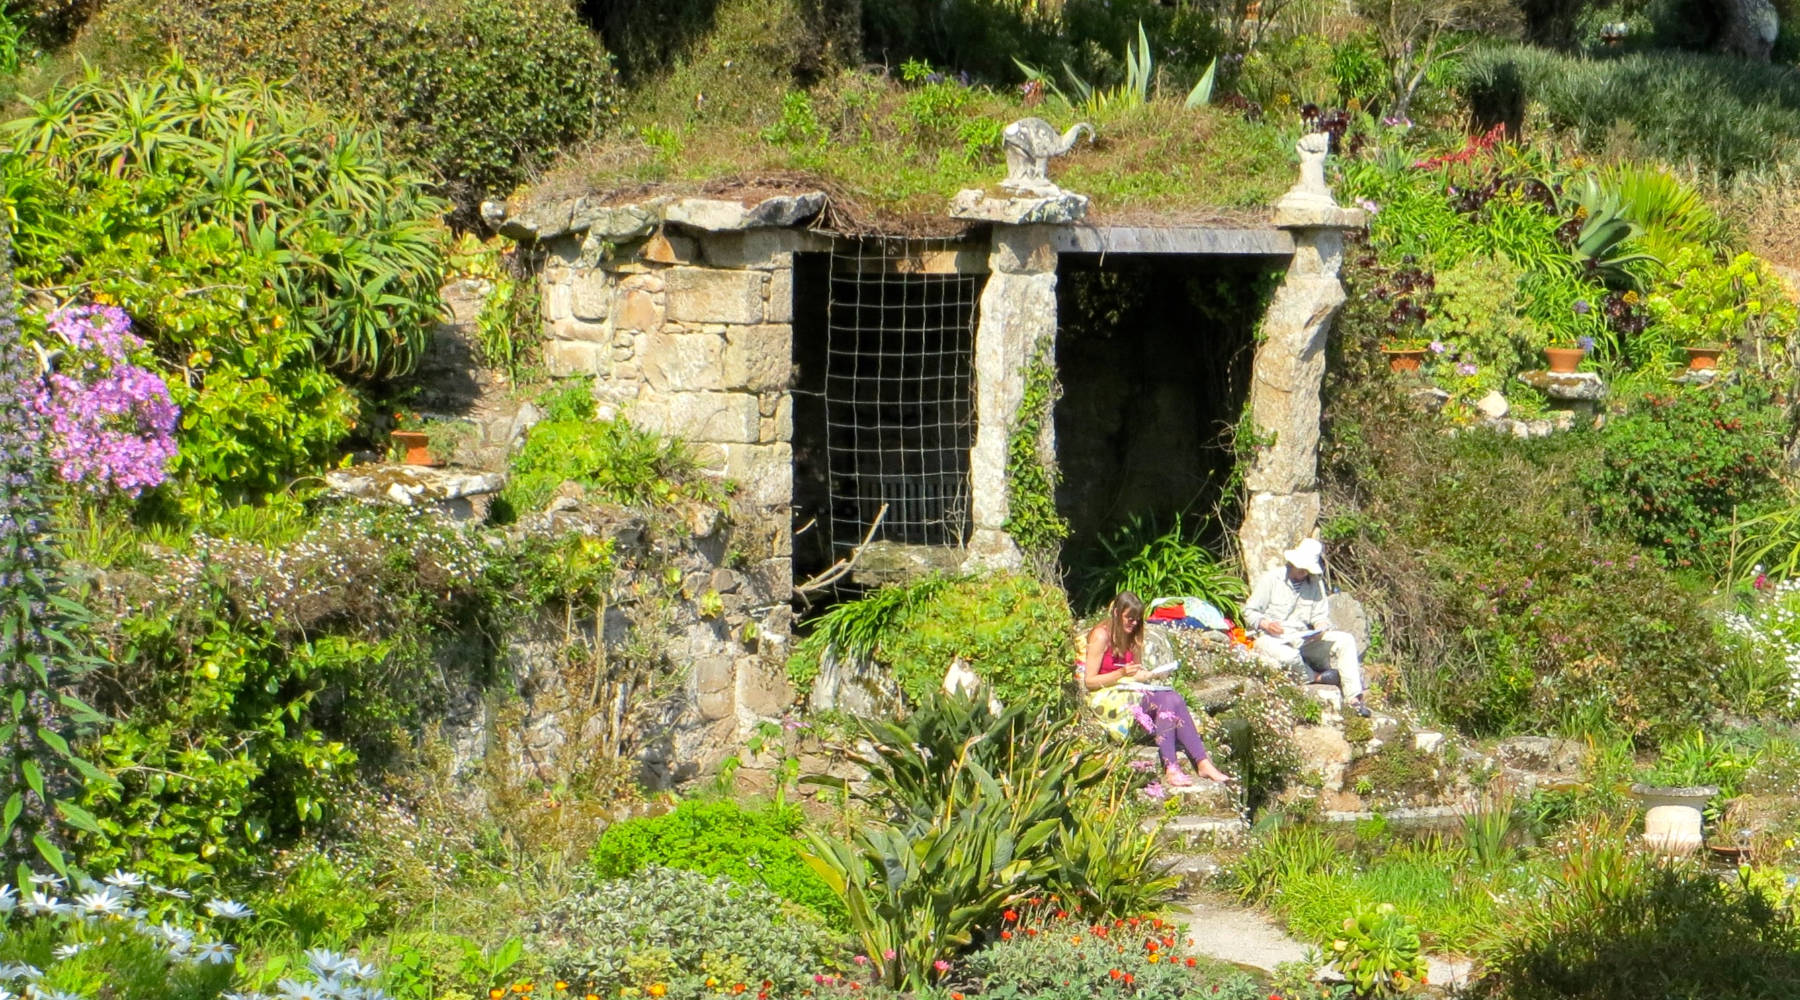 Artists John Dyer and Joanne Short painting in the Tresco Abbey Gardens on Tresco, isles of Scilly